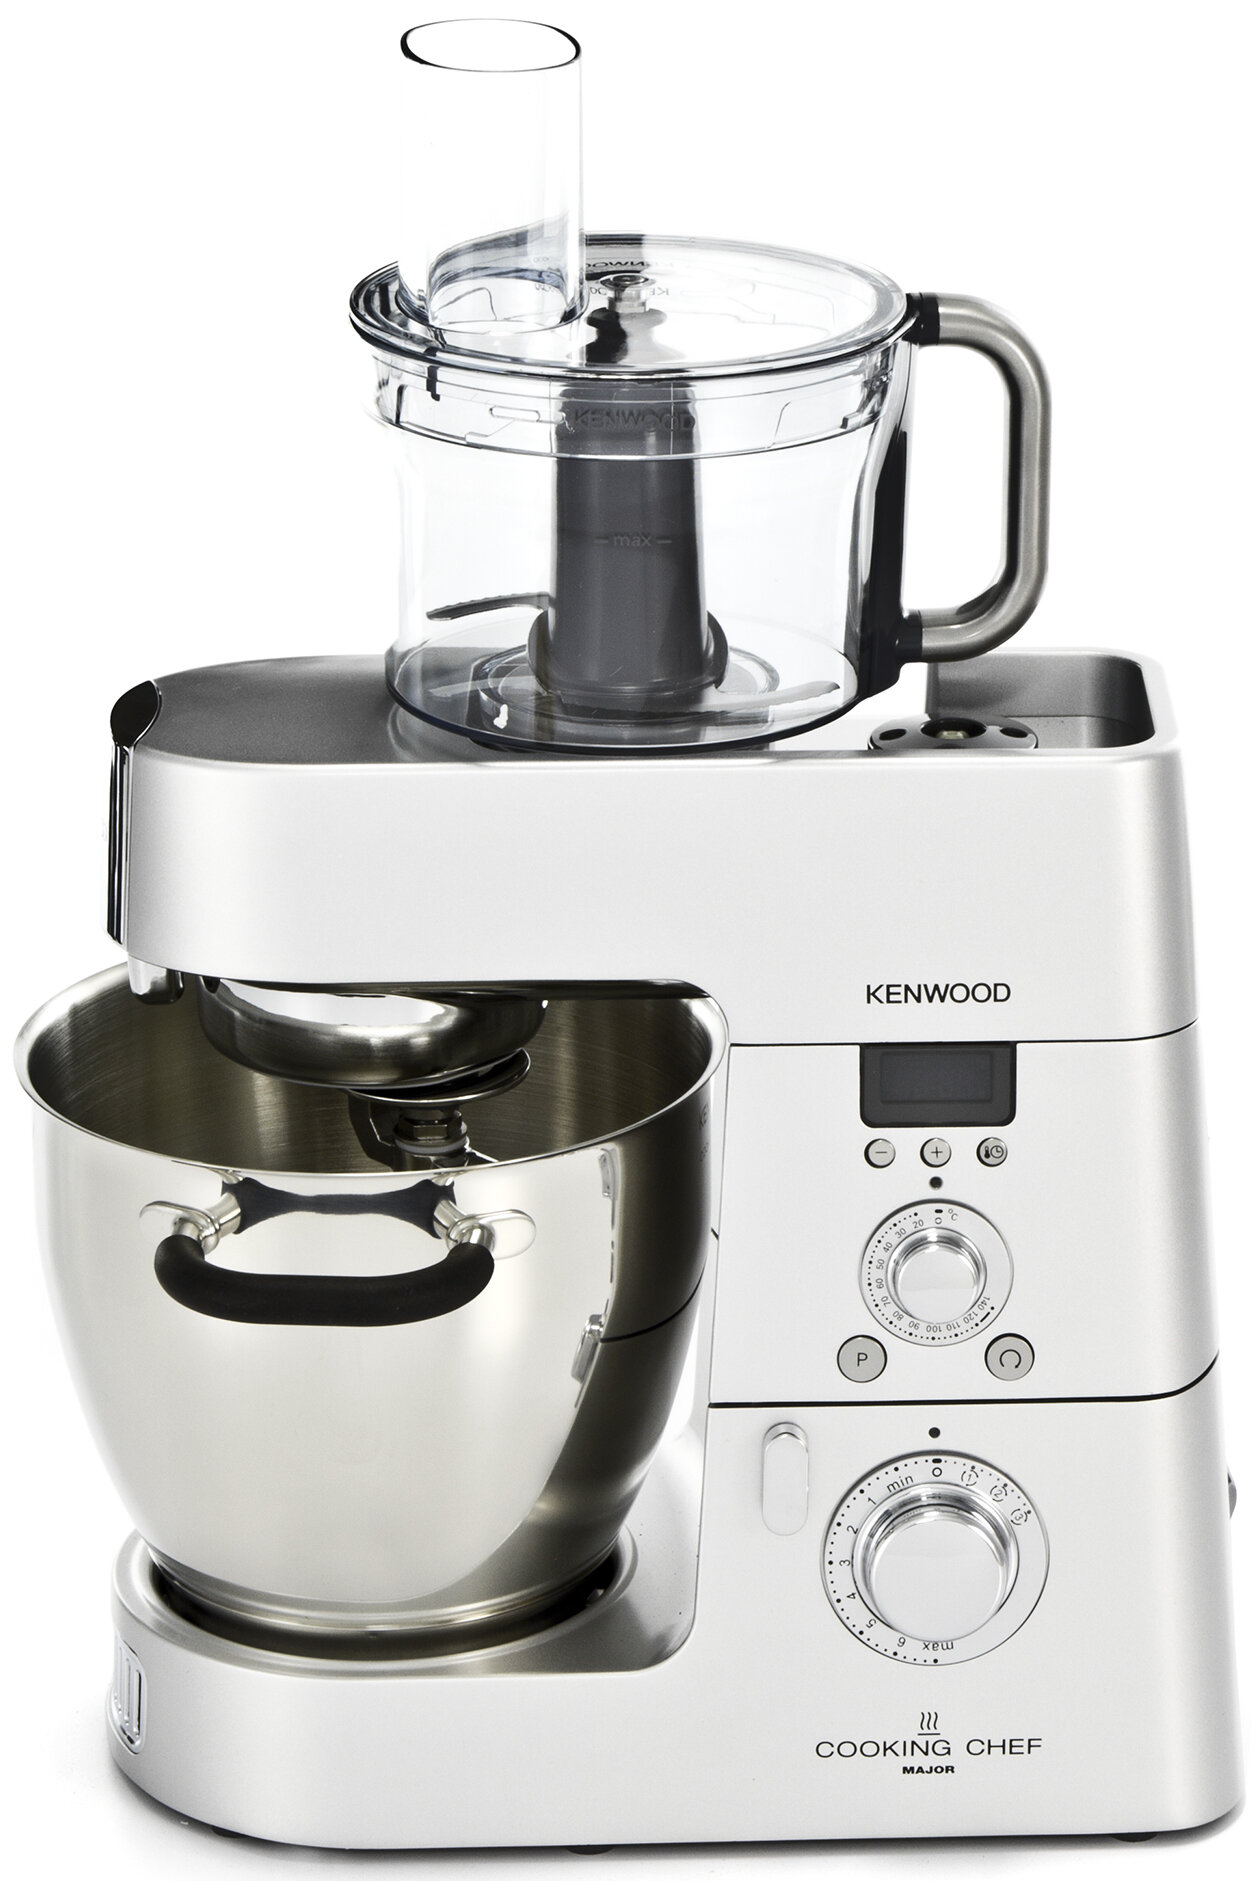 Cheap >kenwood 096 cooking chef big sale - OFF 76%